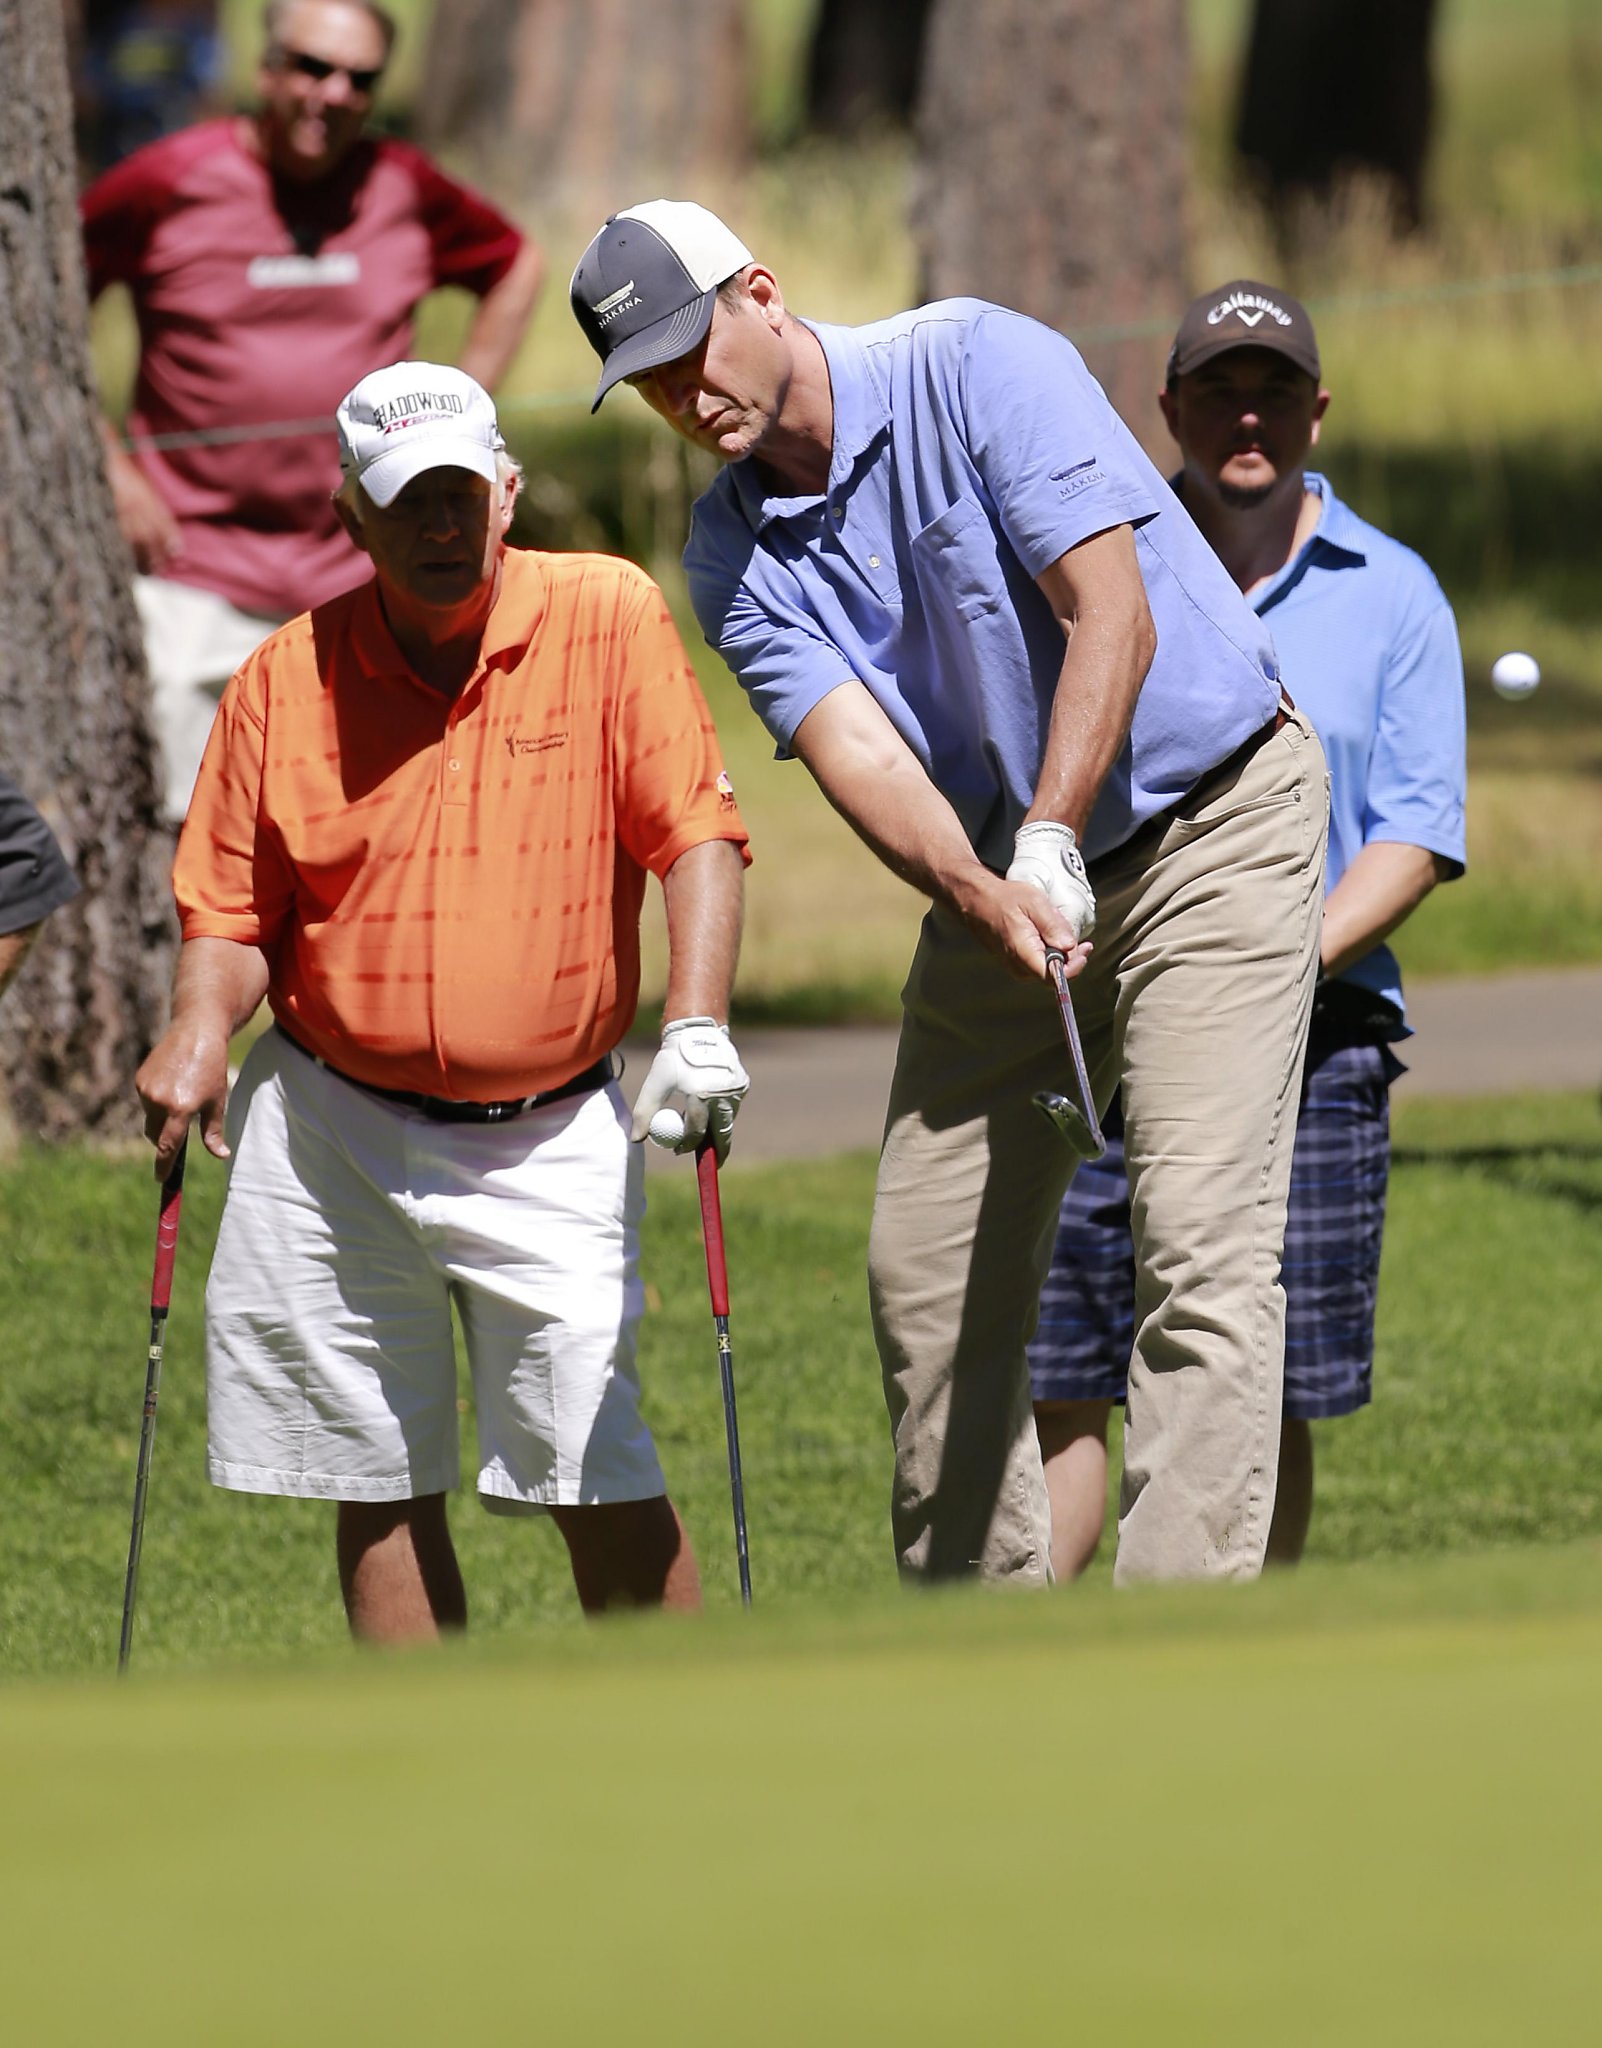 Curry, Timberlake team up, electrify Tahoe celebrity golf tourney